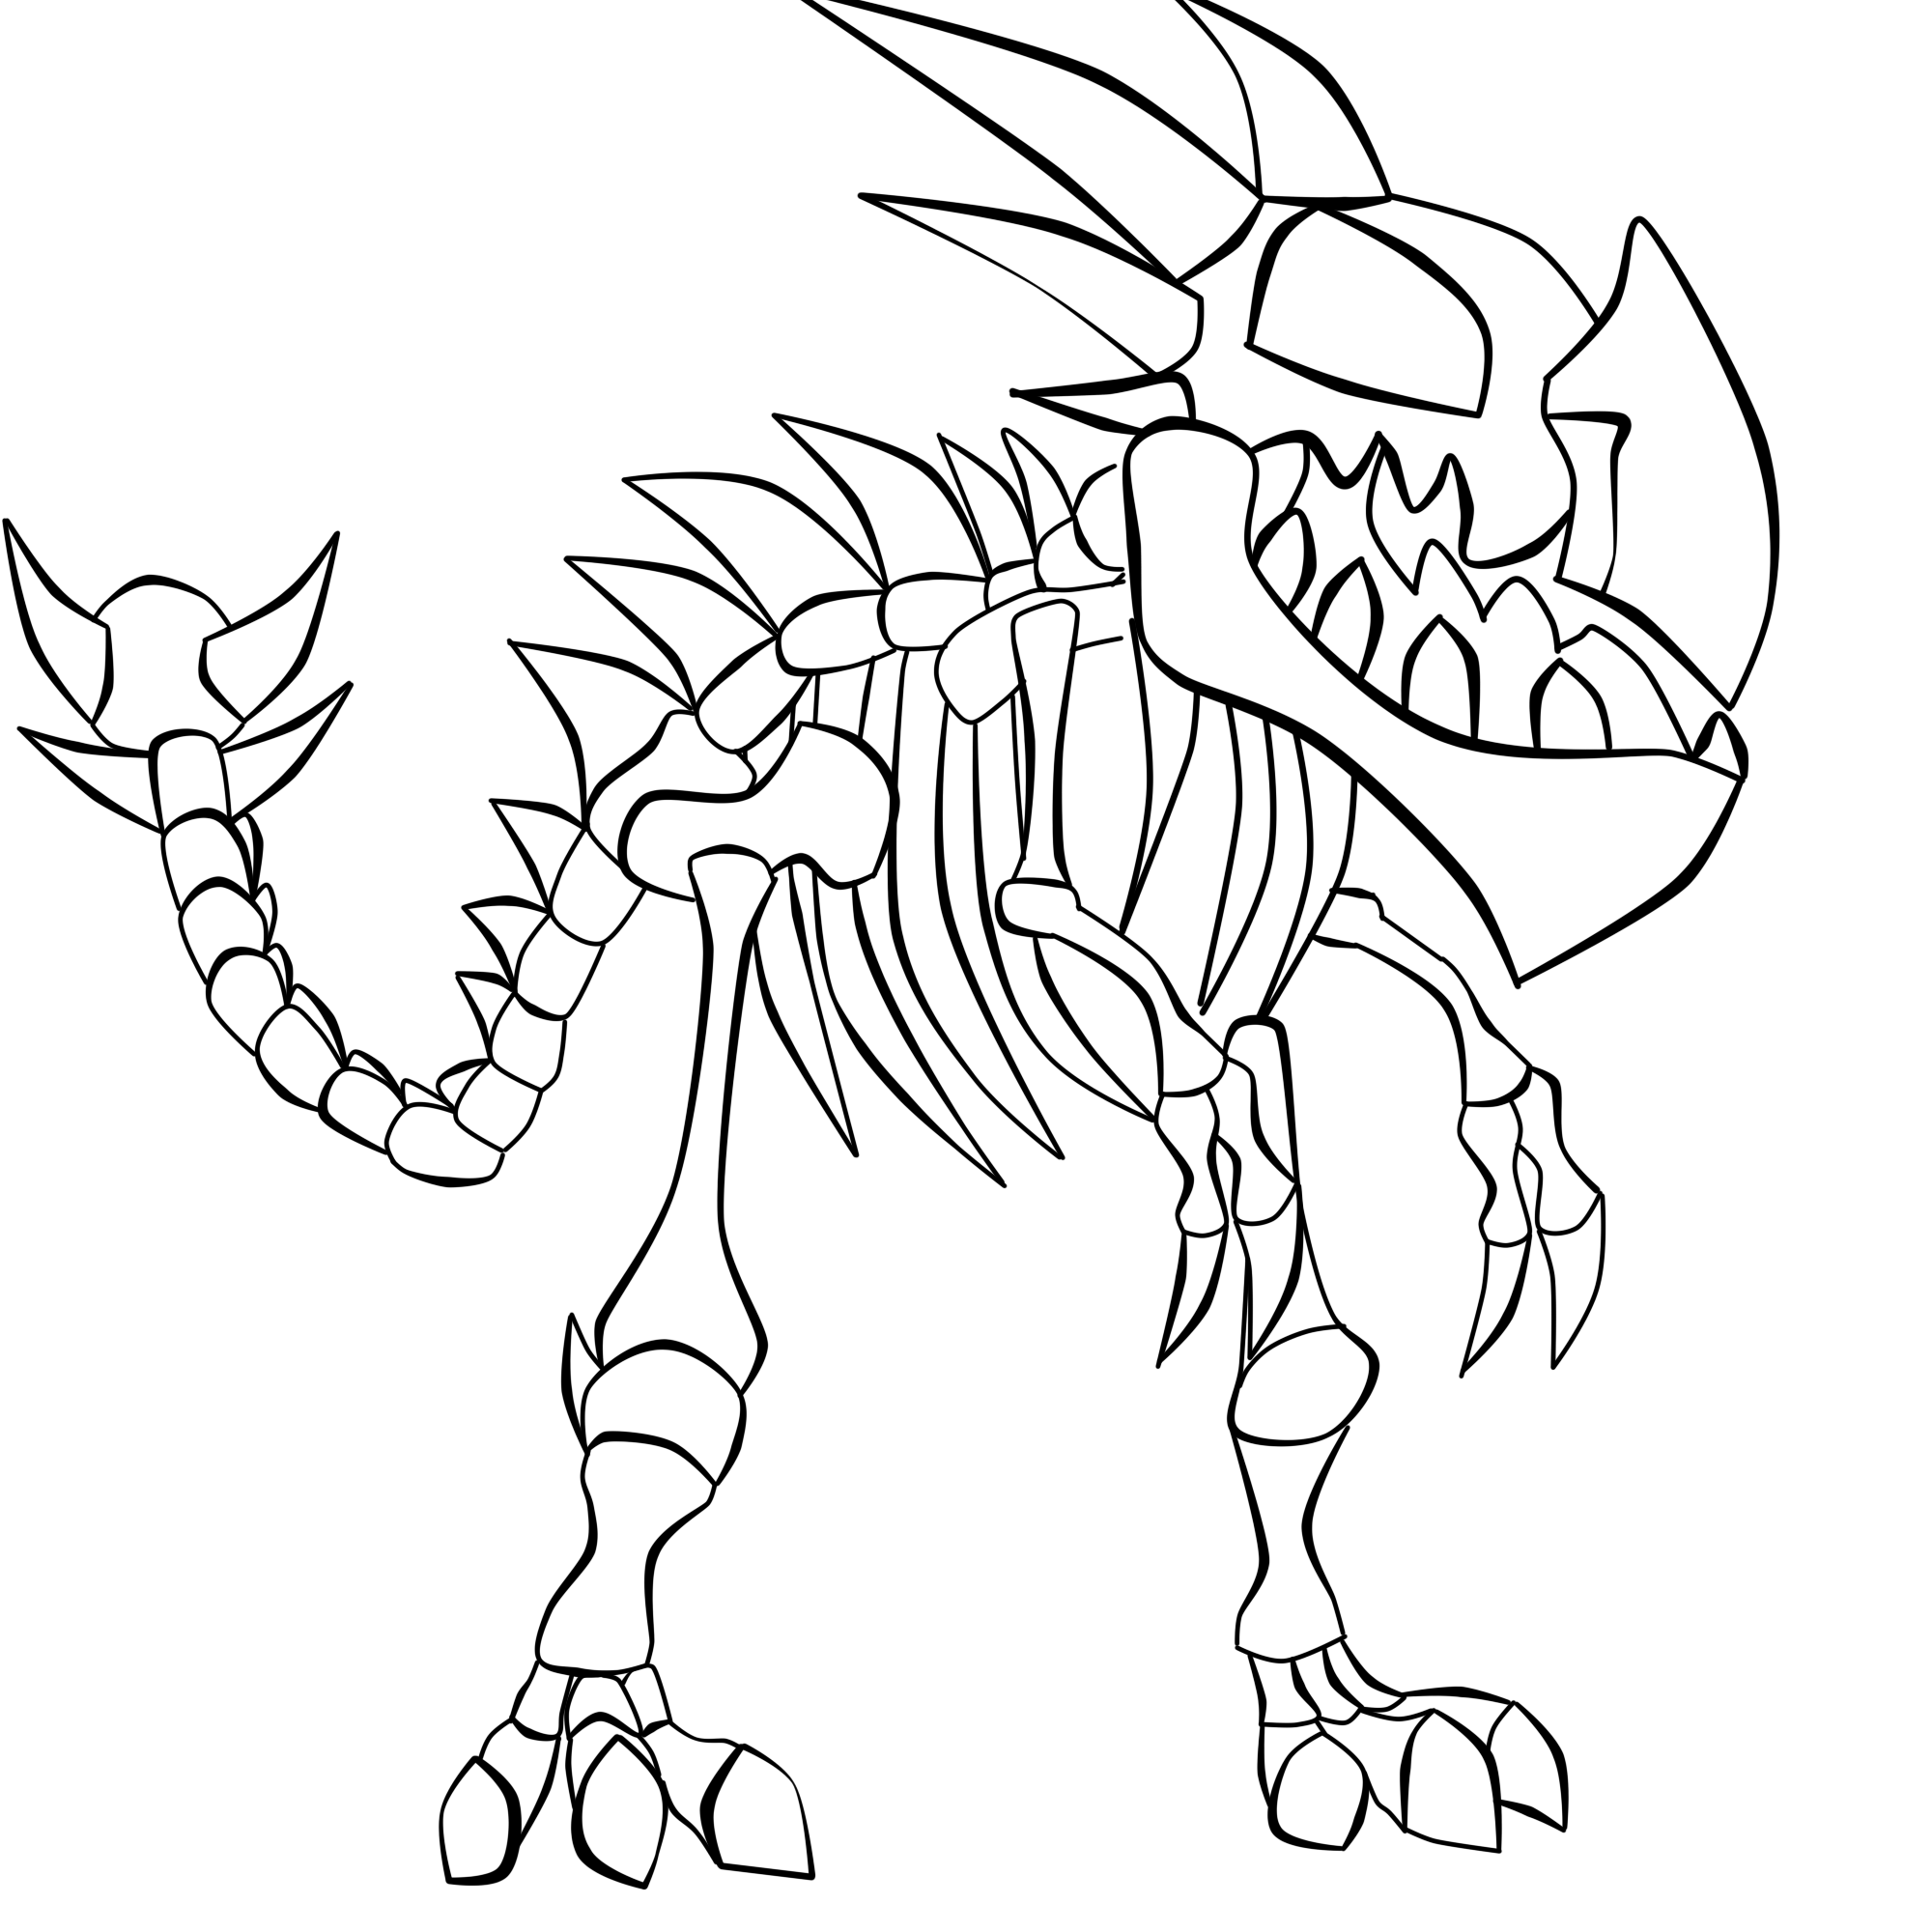 Dragon city game coloring pages